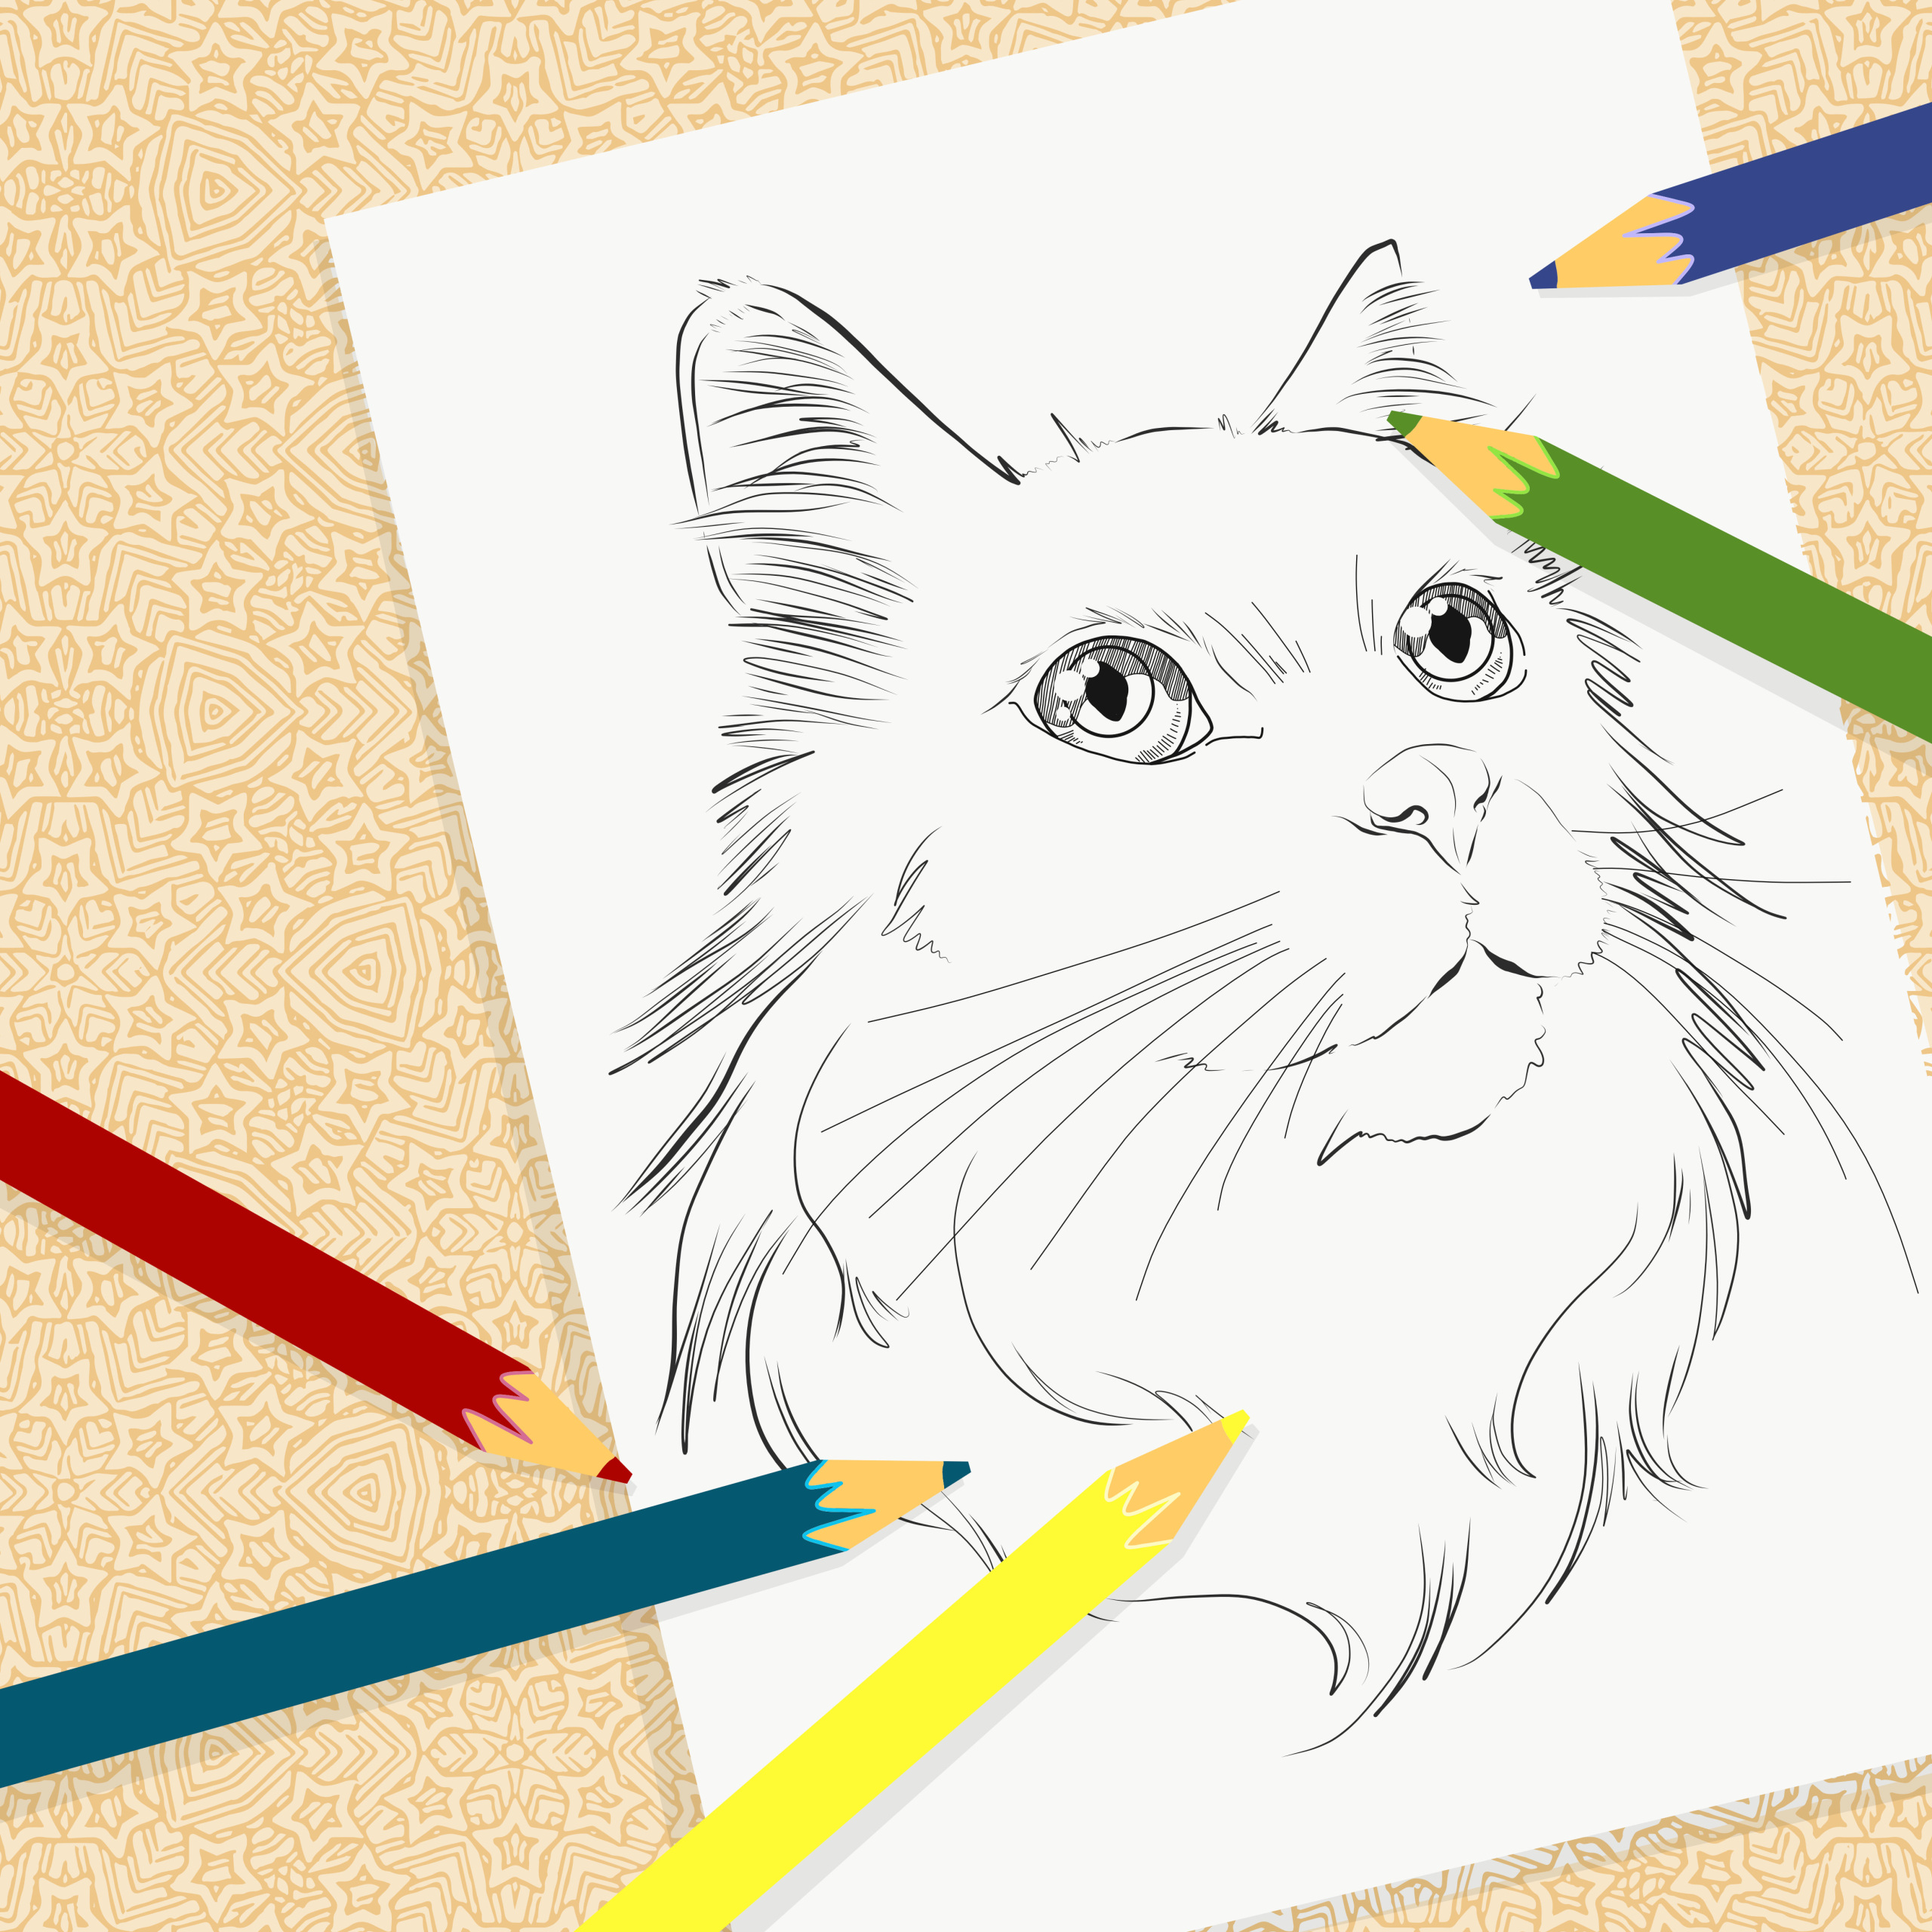 Downloadable Coloring Page- Snow White the Cat